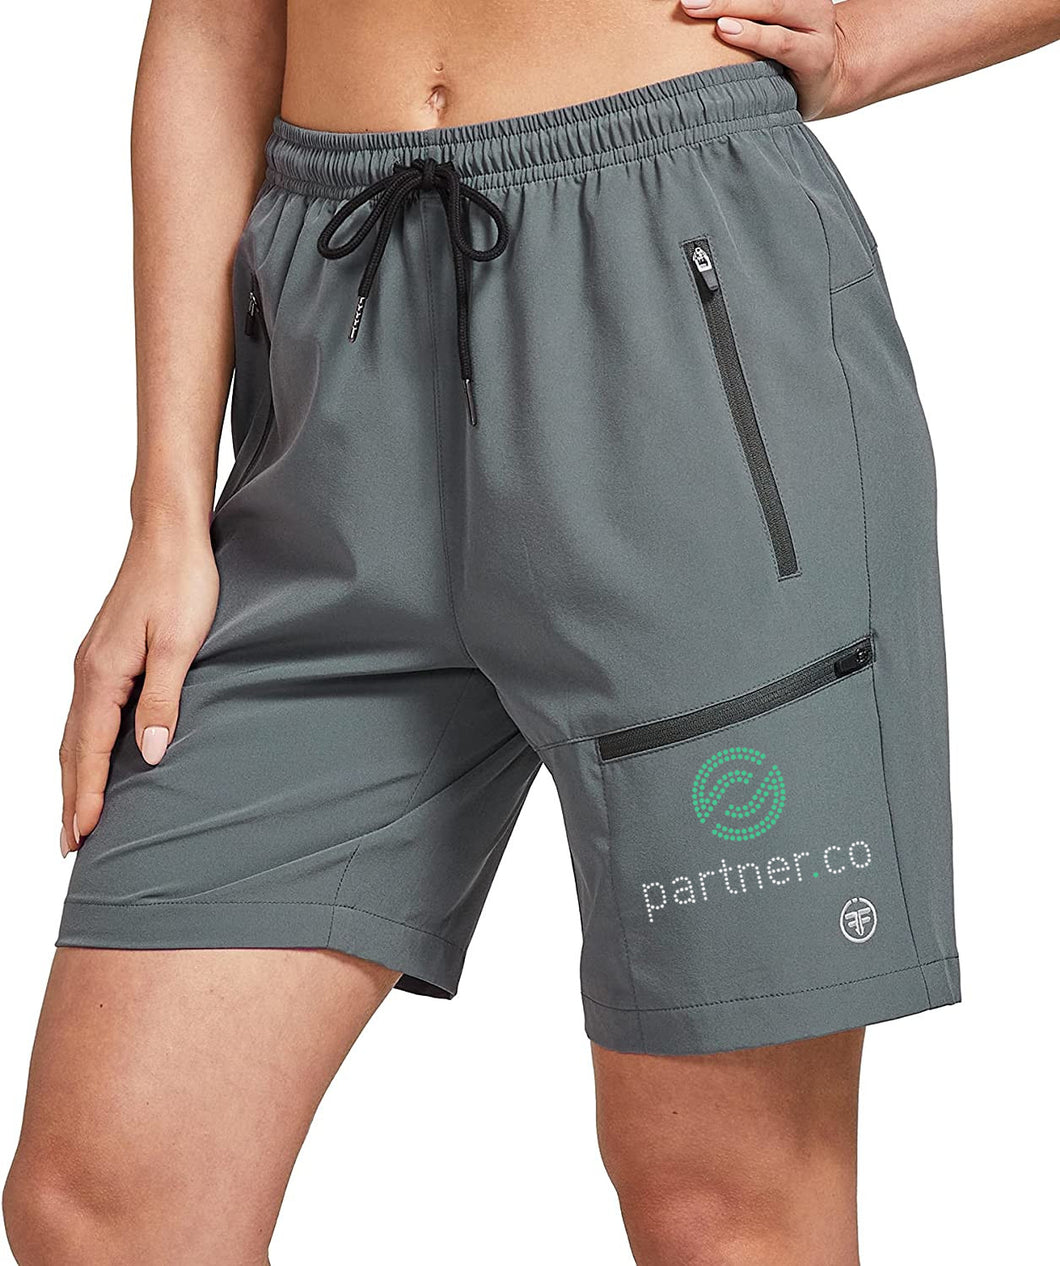 Partner.Co | BLING BUSINESS CASUAL Collection Women's UPF 50+ Cargo Short